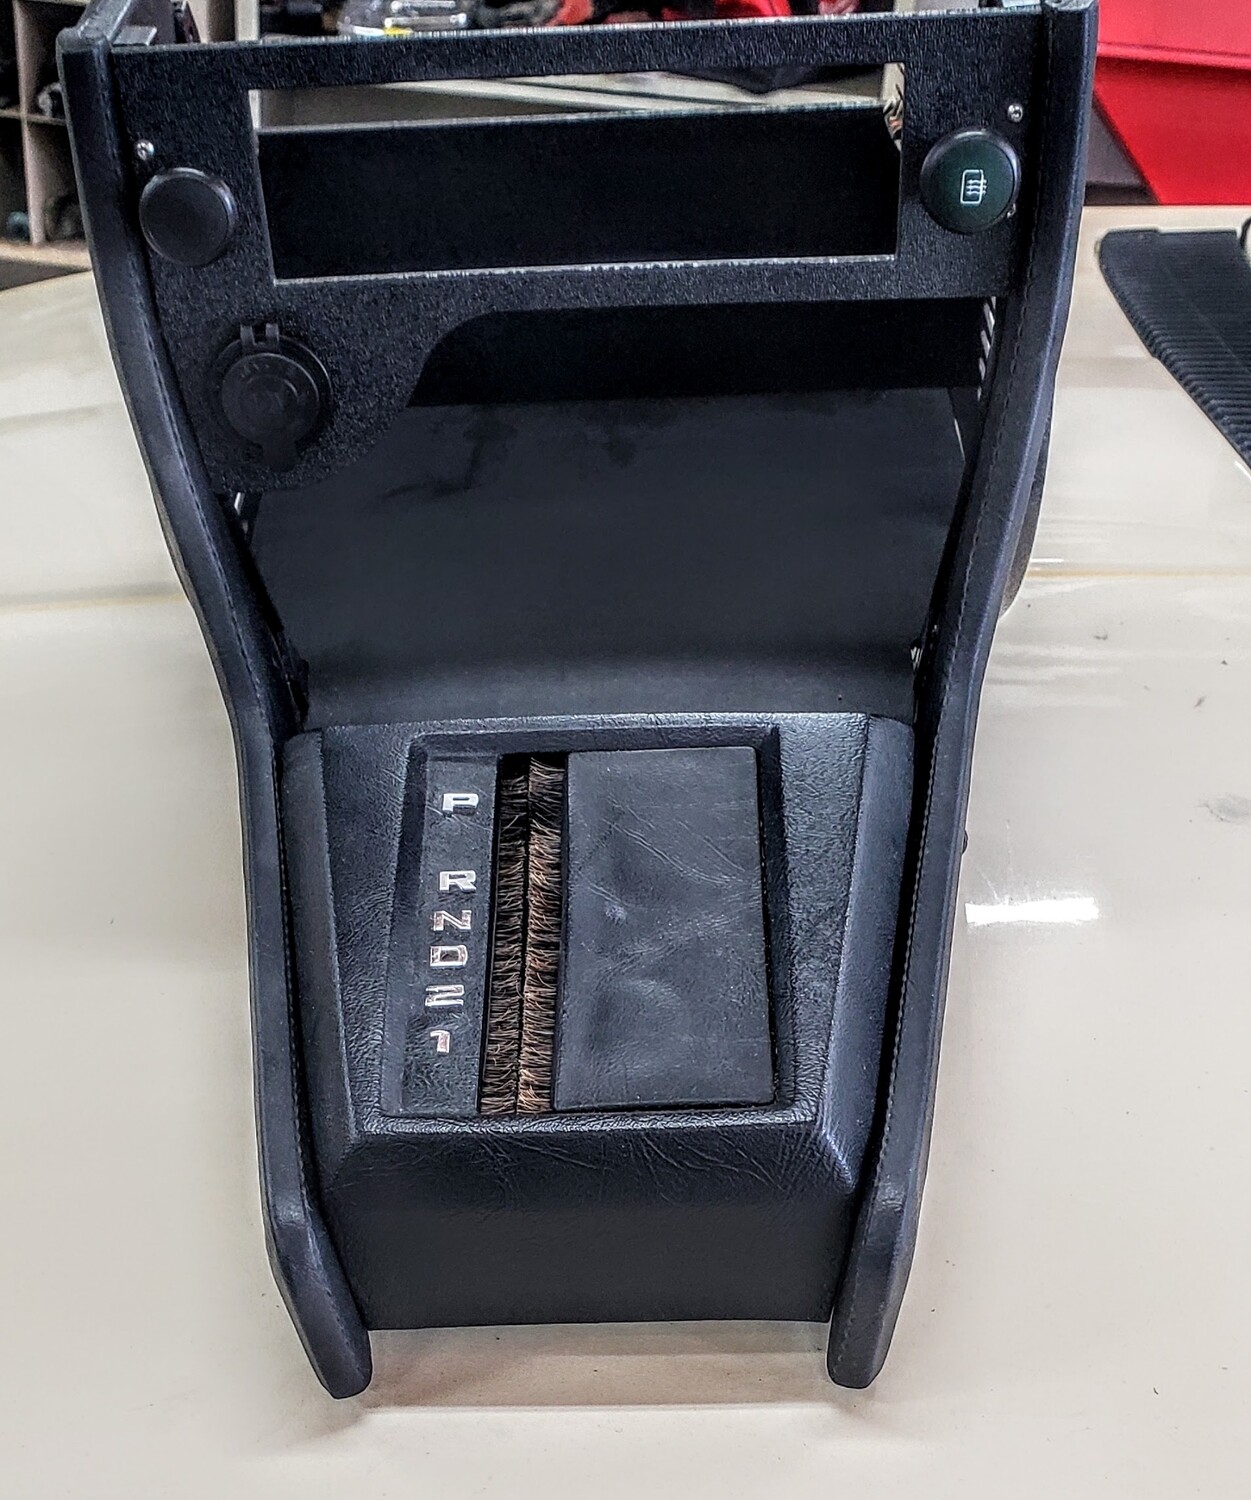 BMW E12 Center Console with Non AC Conversion and Improved Storage